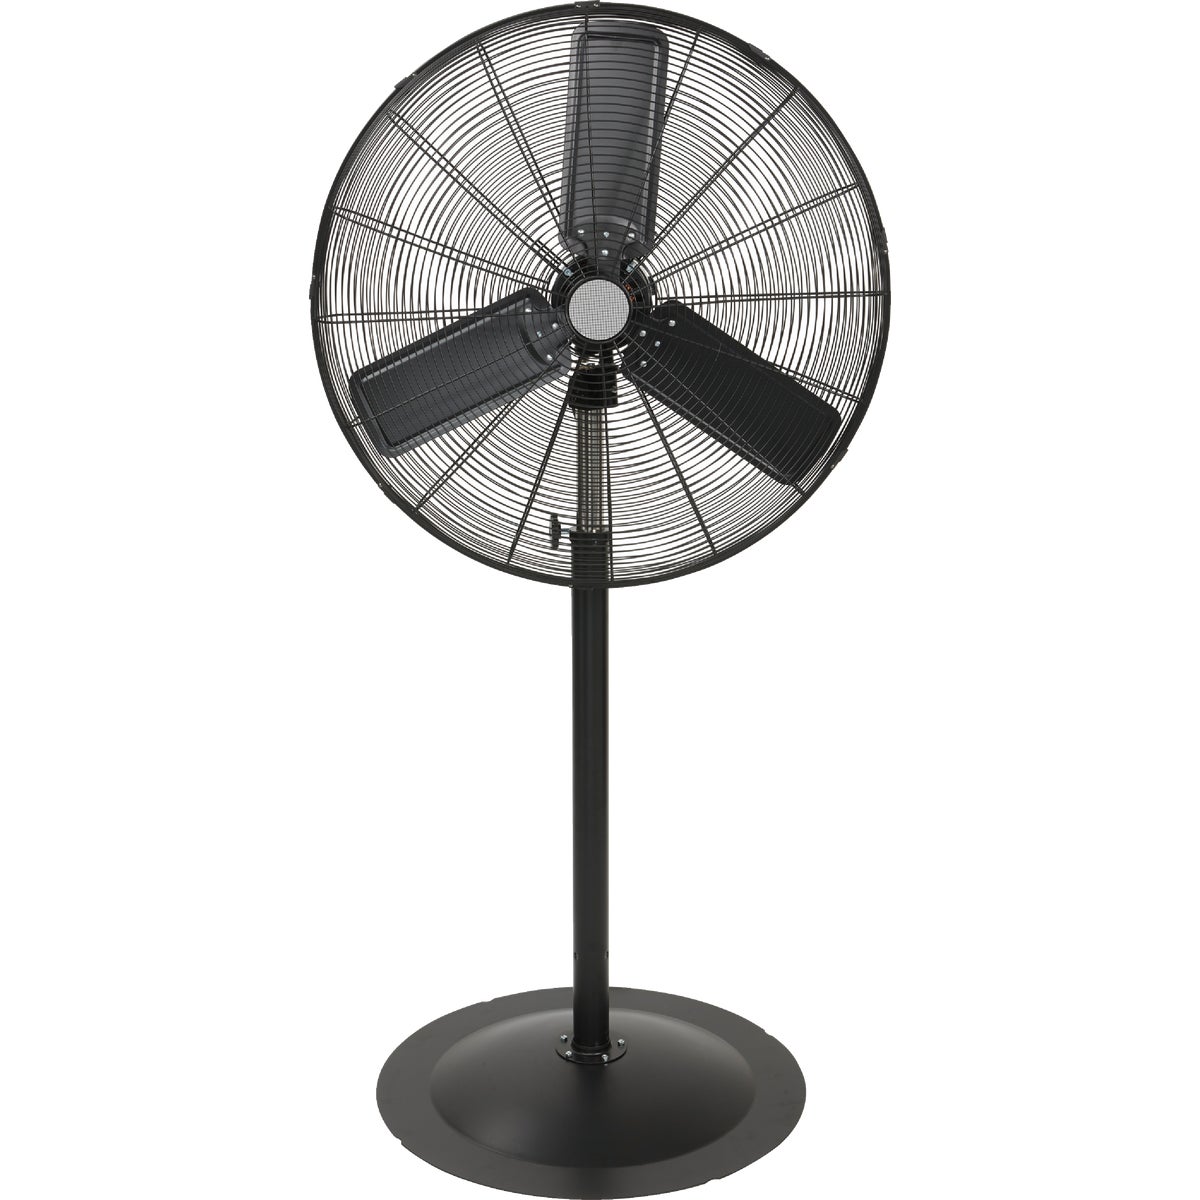 Item 500712, 30-inch oscillating fan with all metal construction and round base.